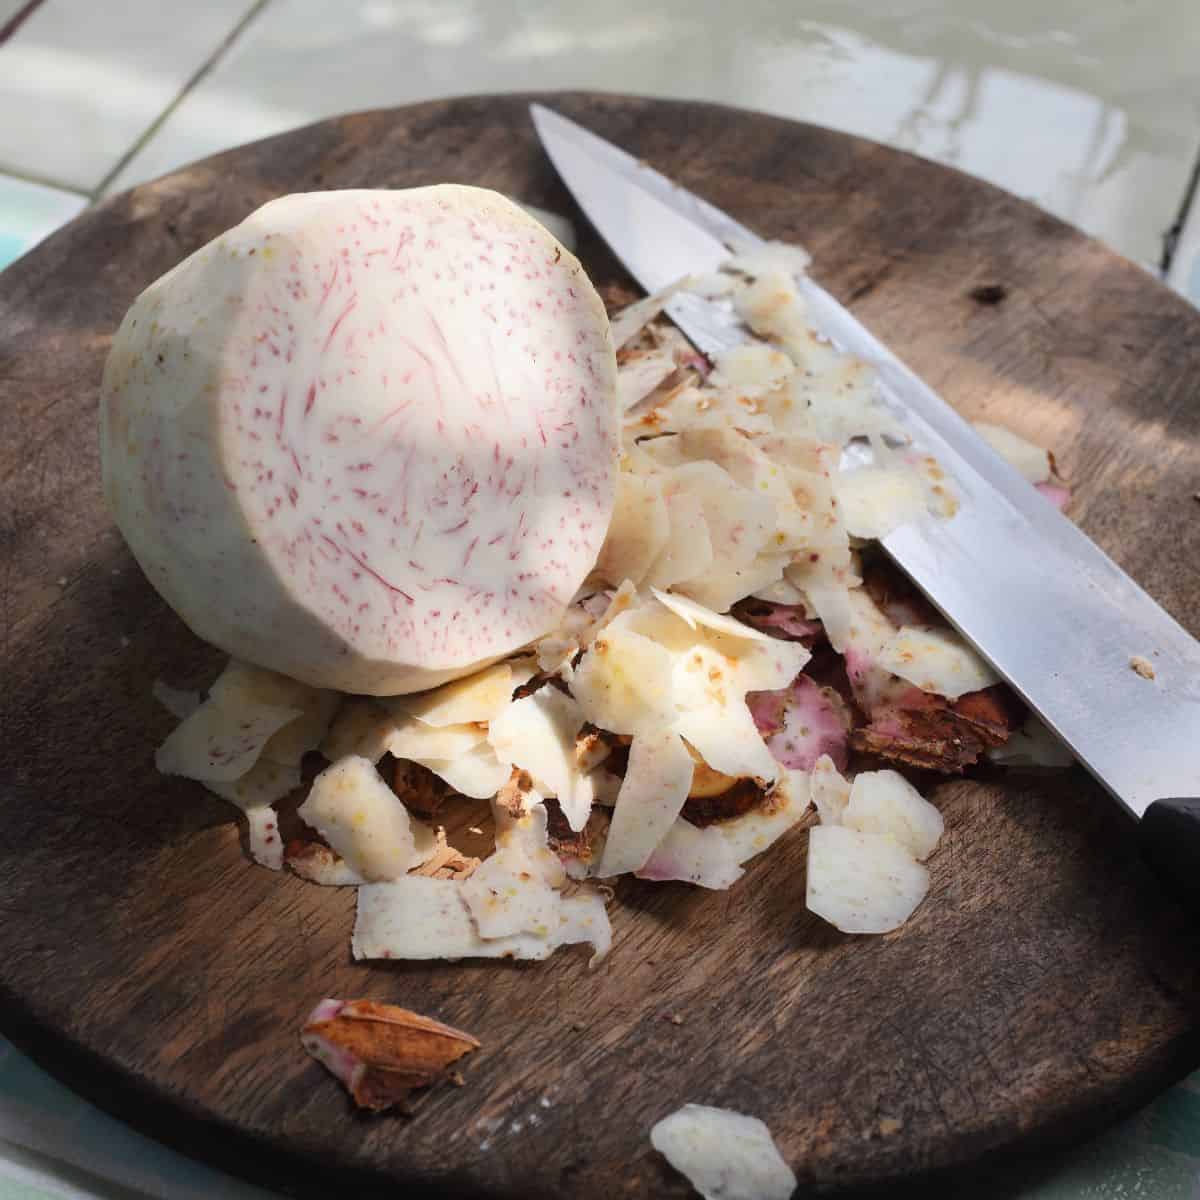 Peeled taro root on a wooden cutting board with a knife.